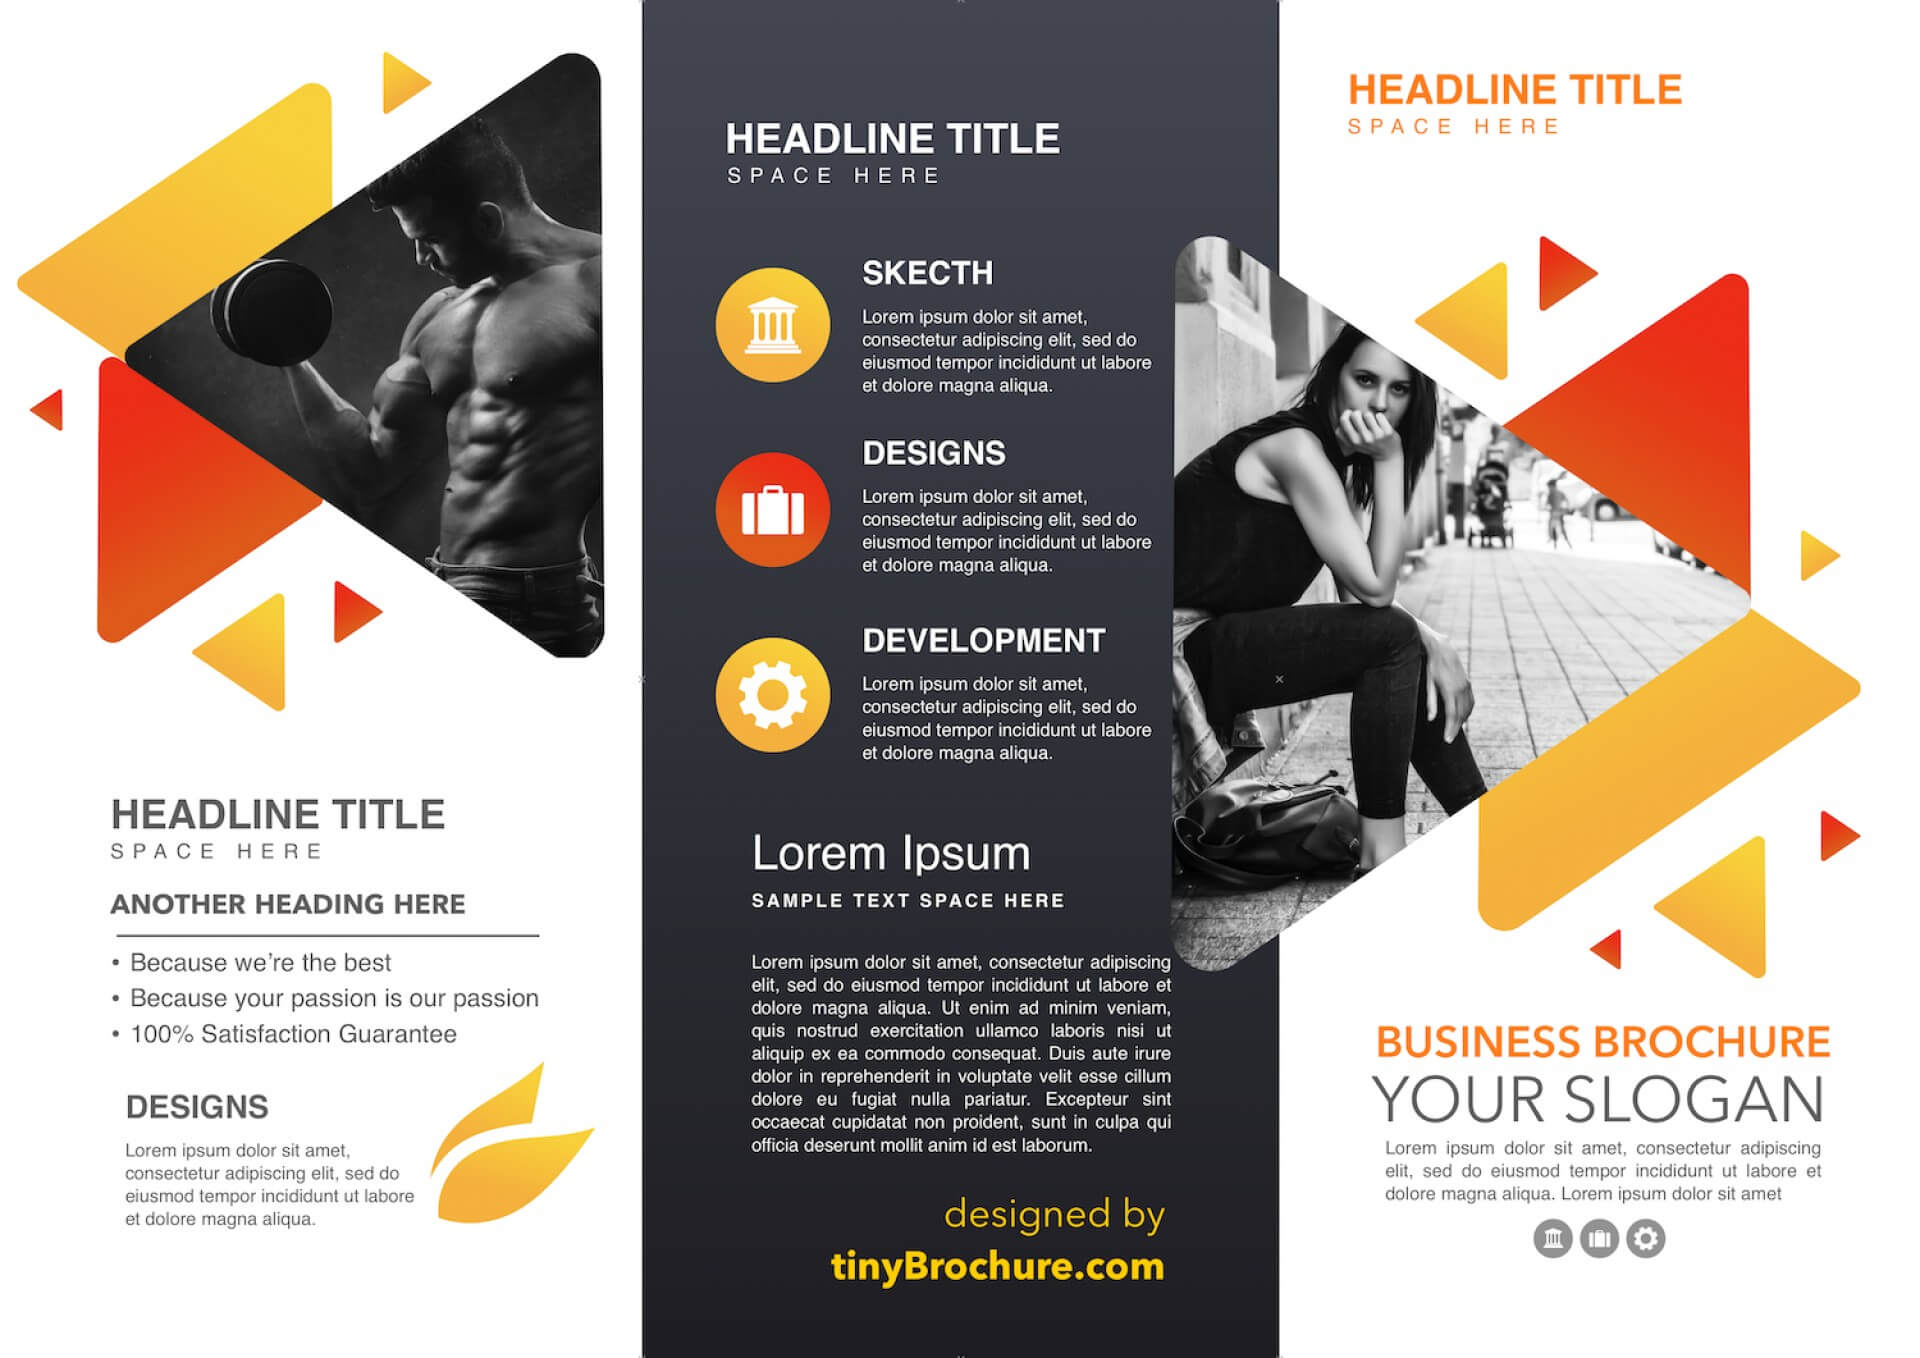 010 Google Docs Science Brochure Template For Luxury Tri Inside Science Brochure Template Google Docs